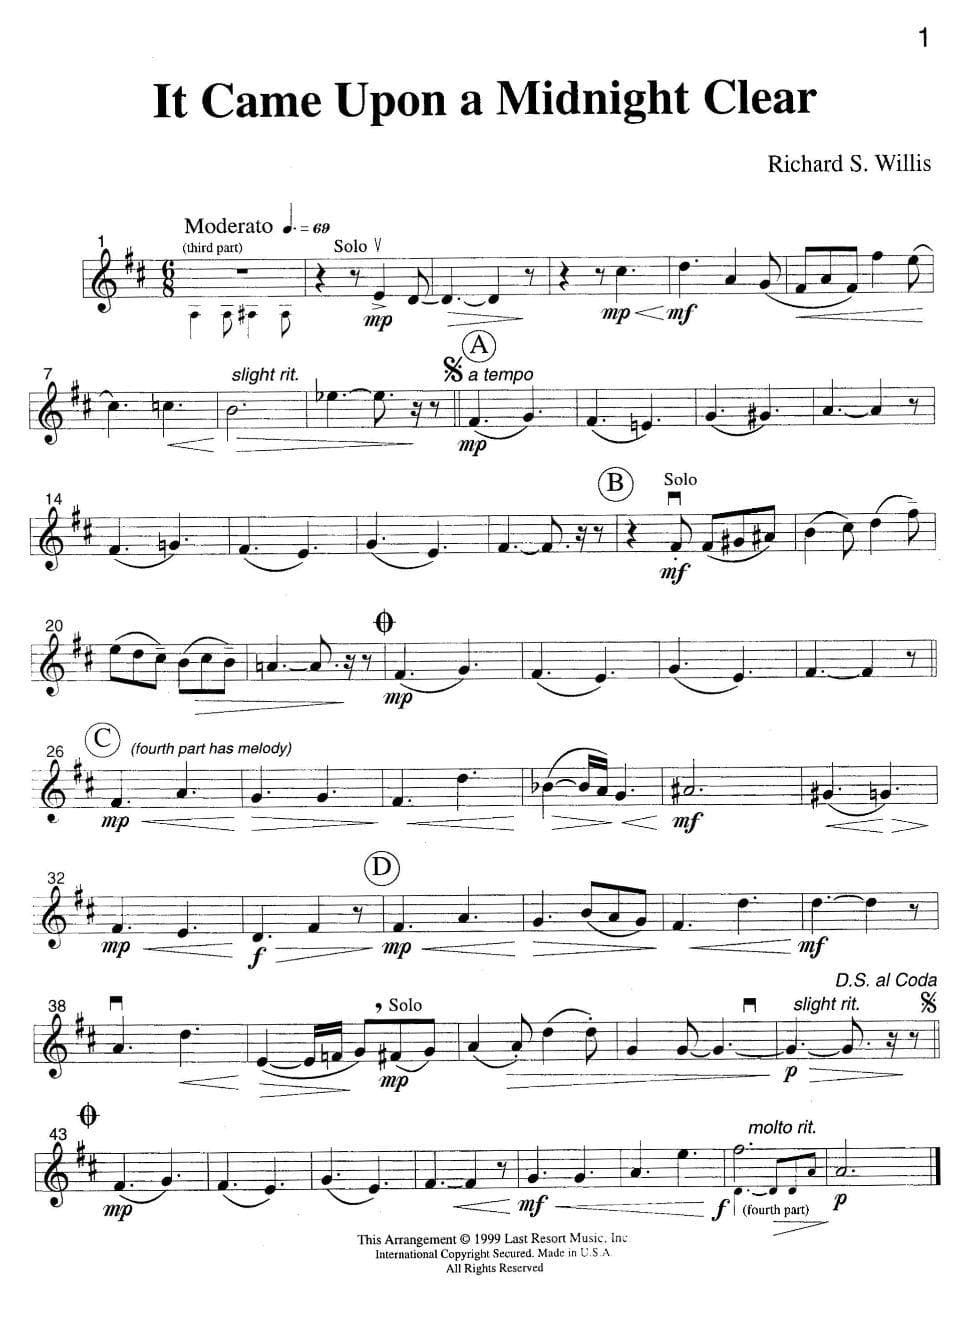 Music for Four: Traditional Christmas Favorites - Part 2 (Violin/Oboe/Flute) - arranged by Daniel Kelley - Last Resort Music